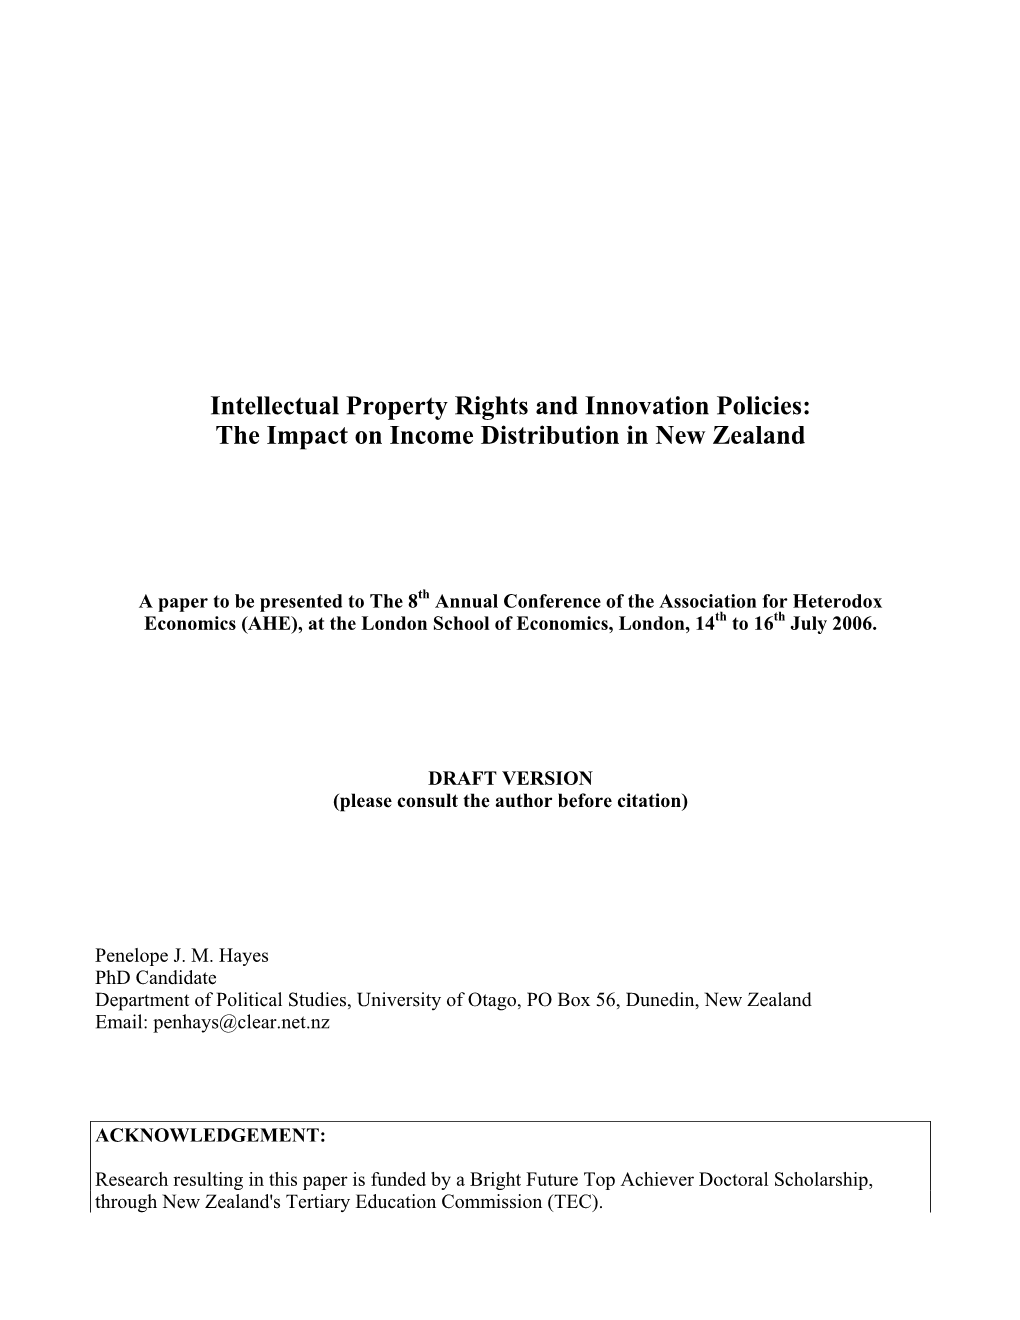 Intellectual Property Rights and Innovation Policies: the Impact on Income Distribution in New Zealand